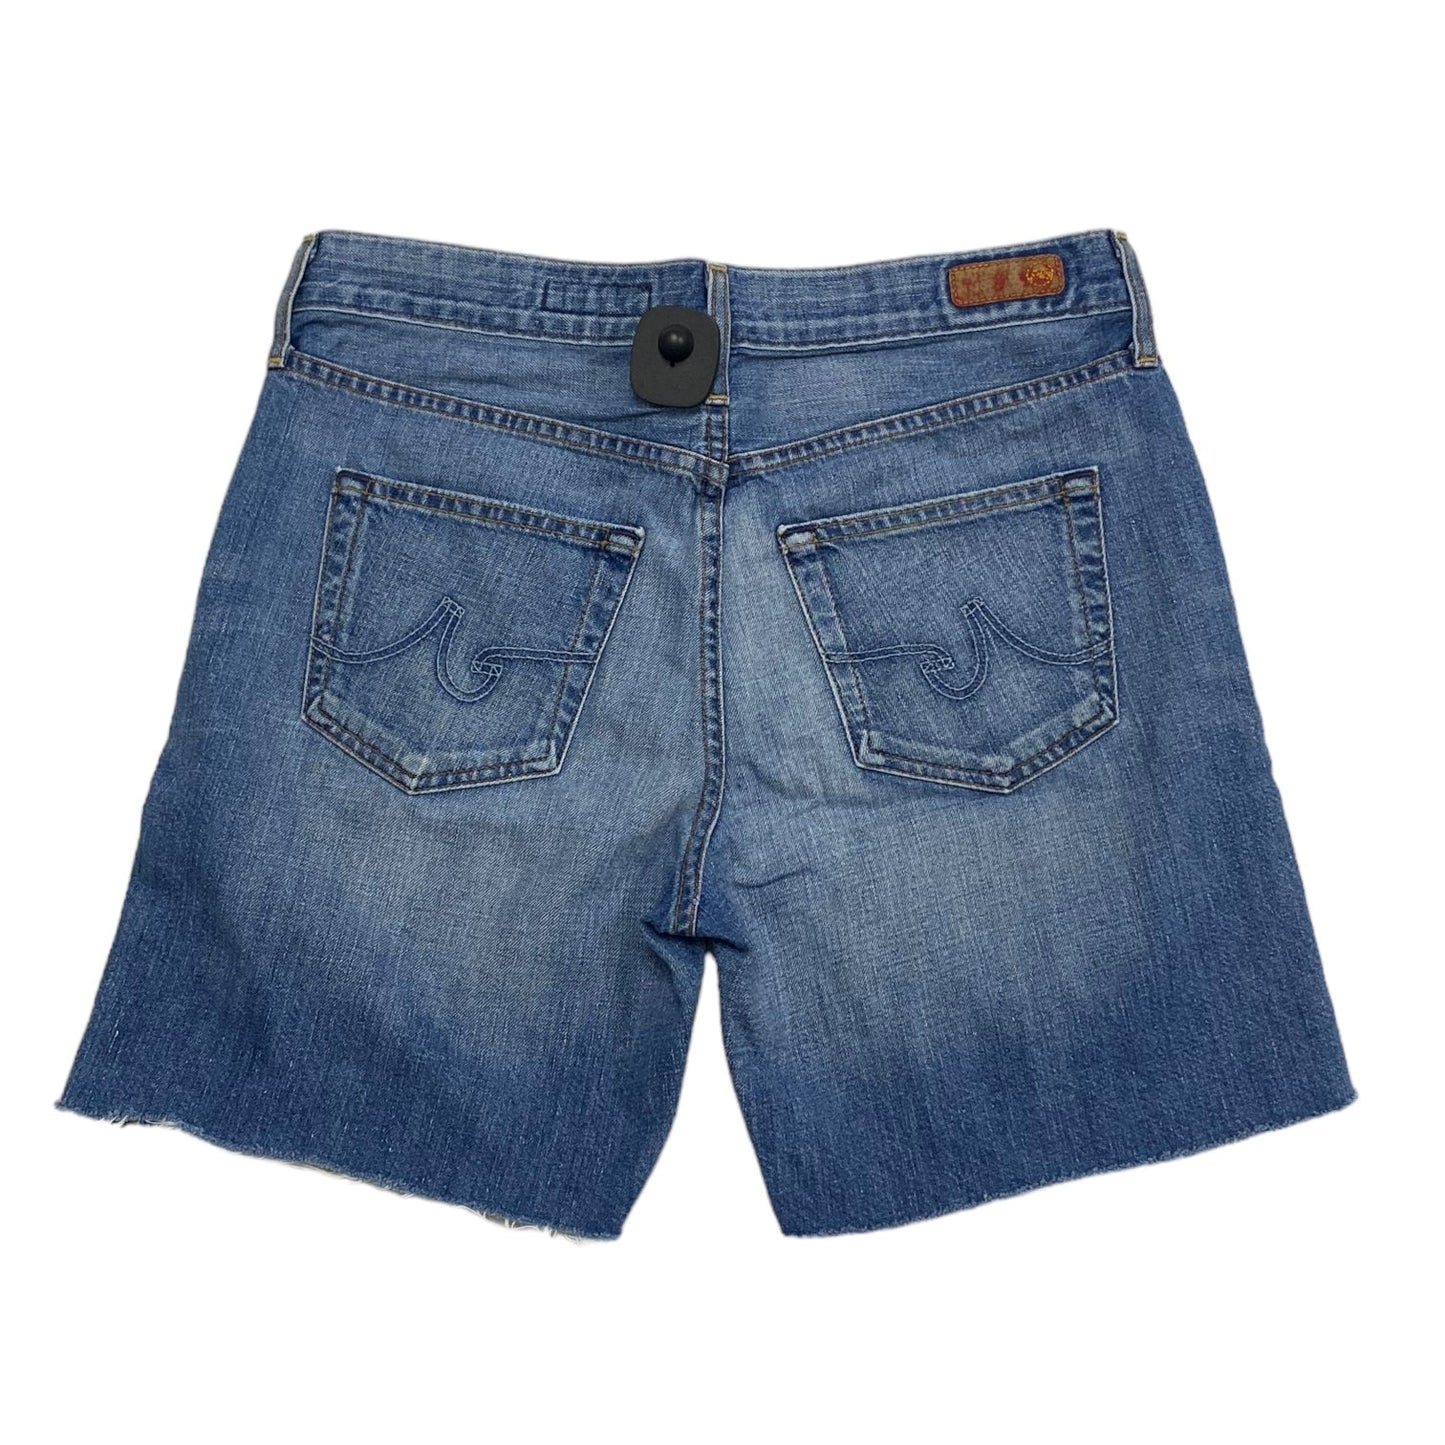 Shorts By Adriano Goldschmied  Size: 8